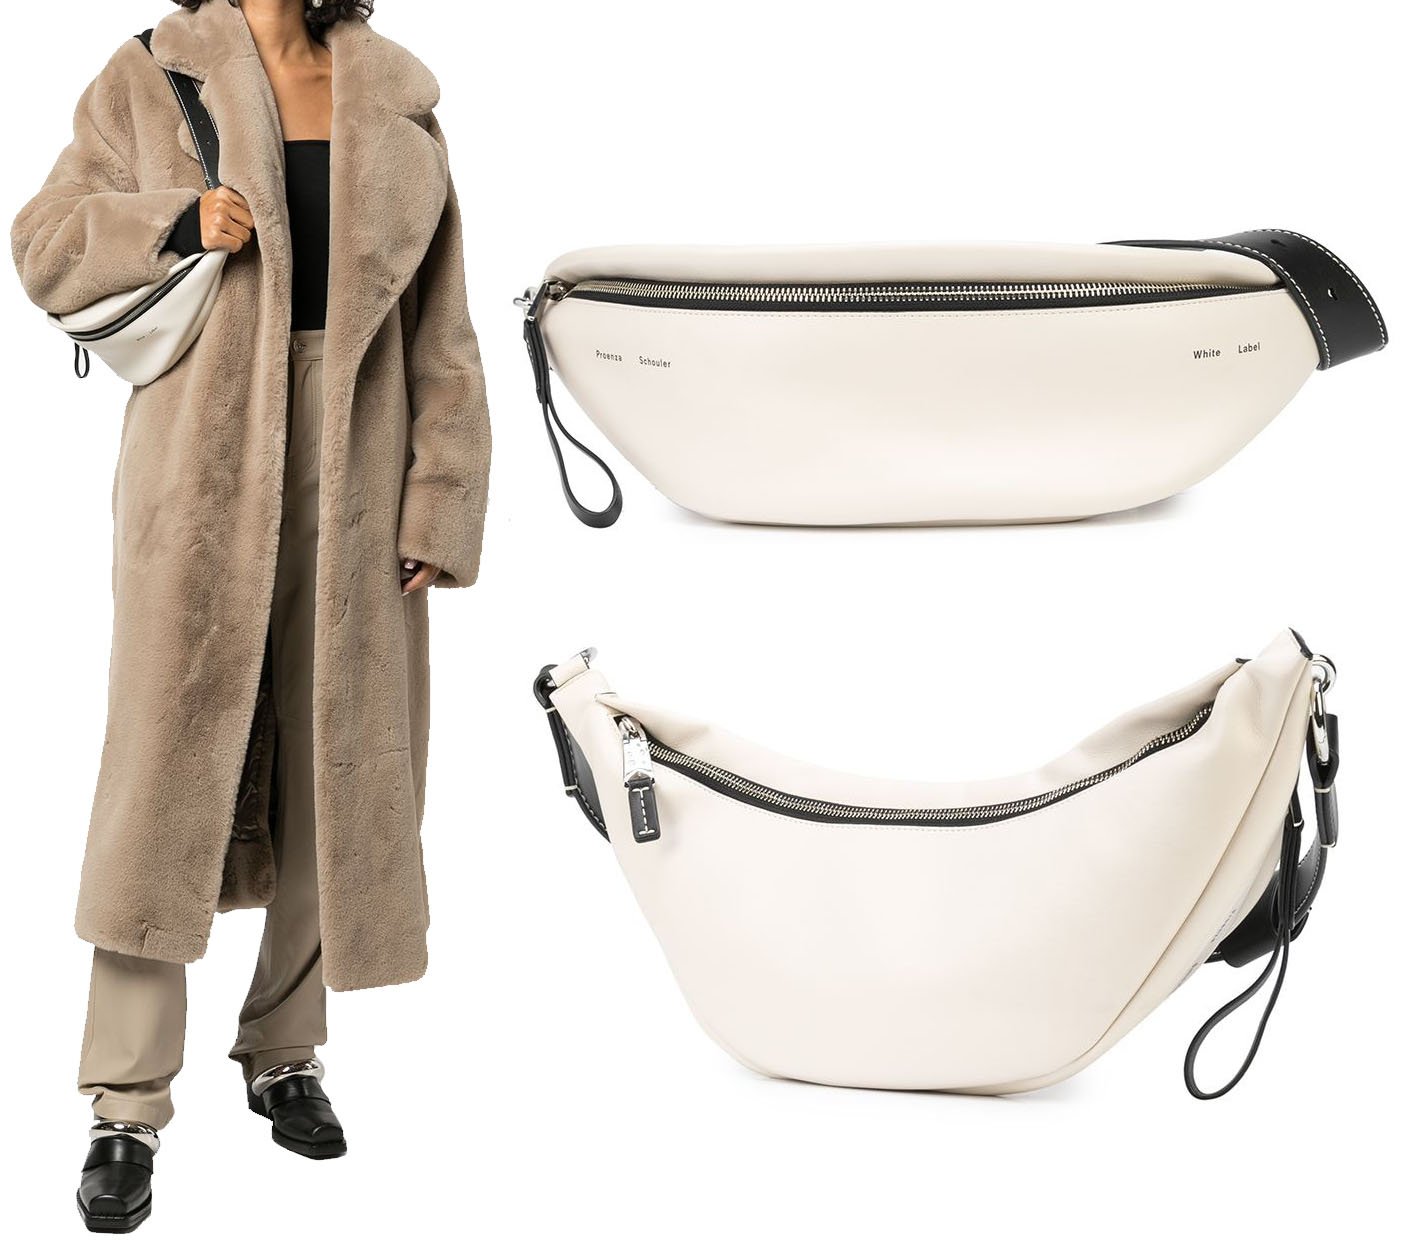 The Stanton leather sling bag from Proenza Schouler White Label can help elevate your look